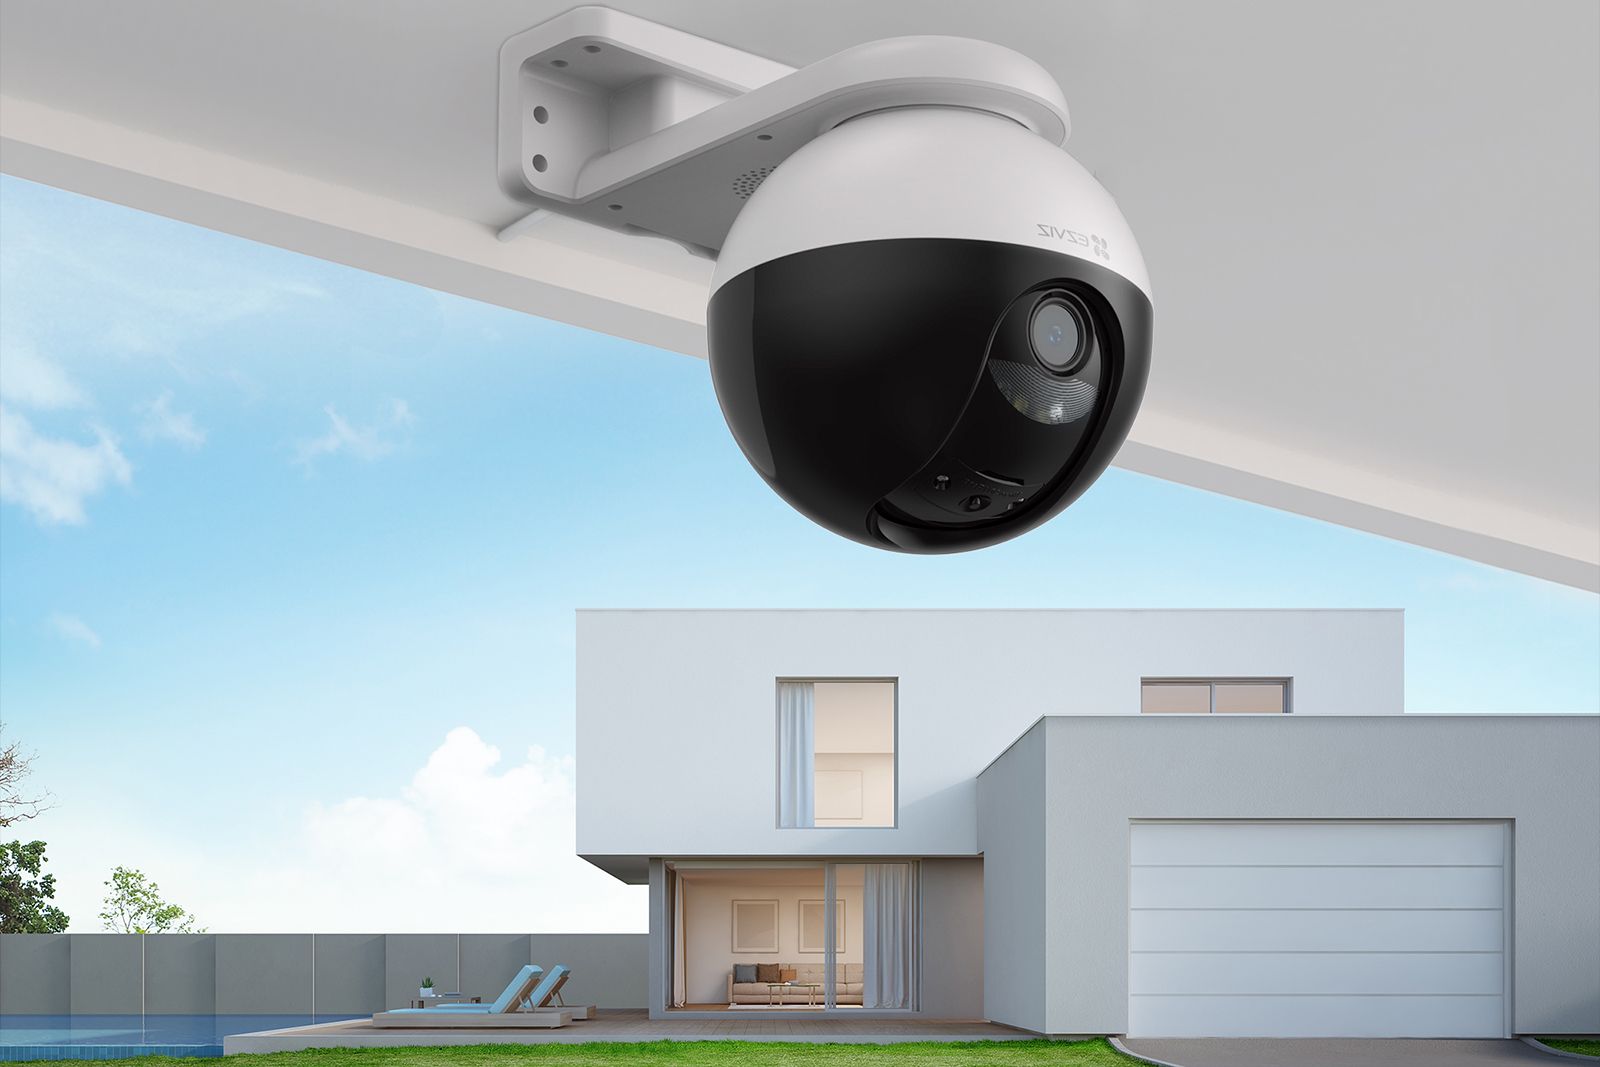 Eliminate all blind spots and monitor every inch of your home with the EZVIZ C8W Pro pan-and-tilt camera photo 3